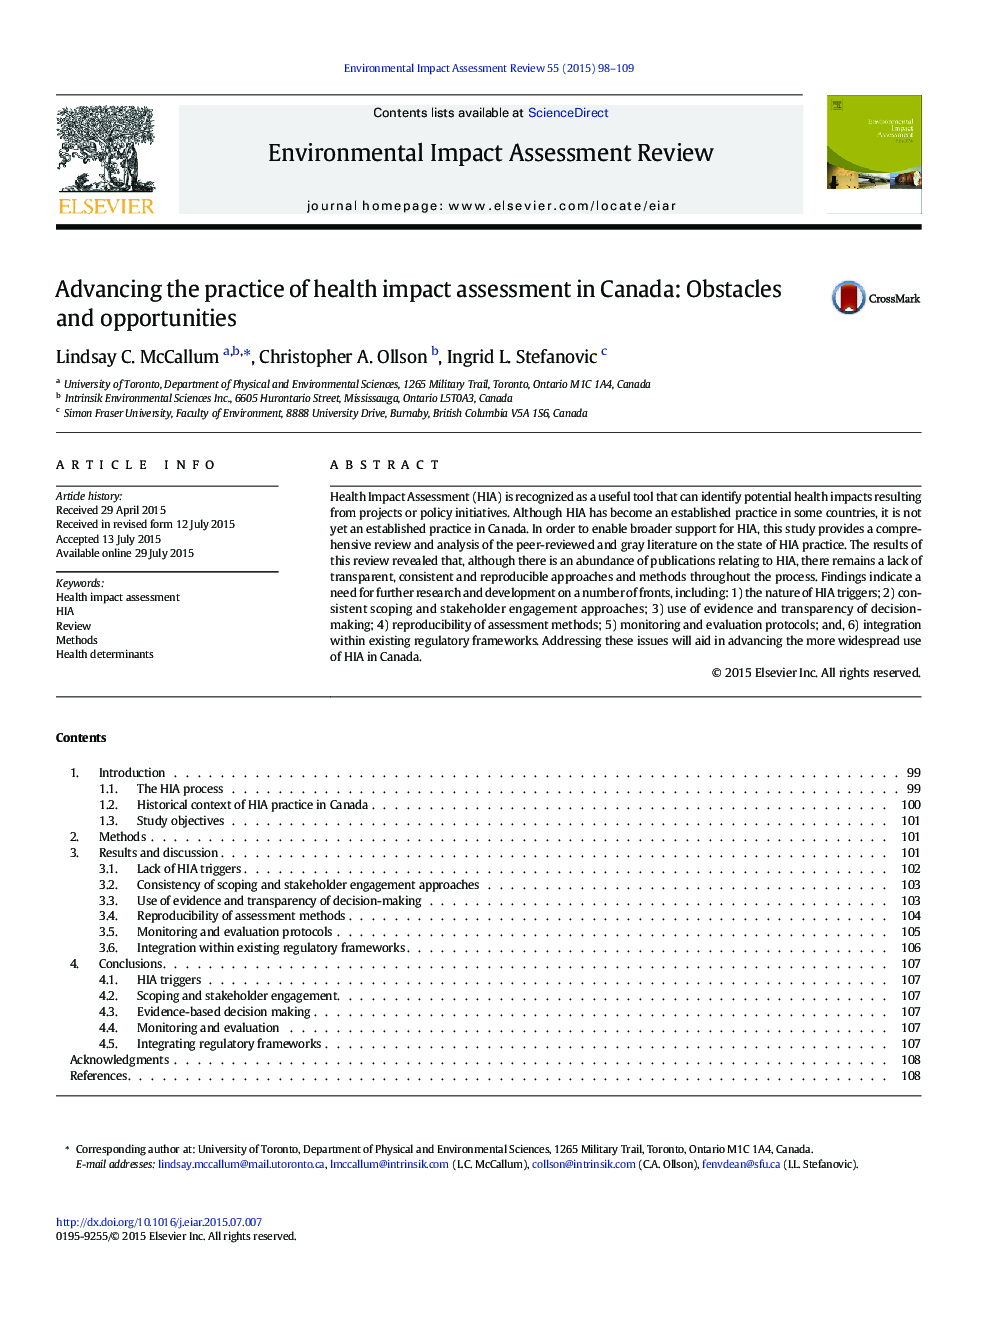 Advancing the practice of health impact assessment in Canada: Obstacles and opportunities